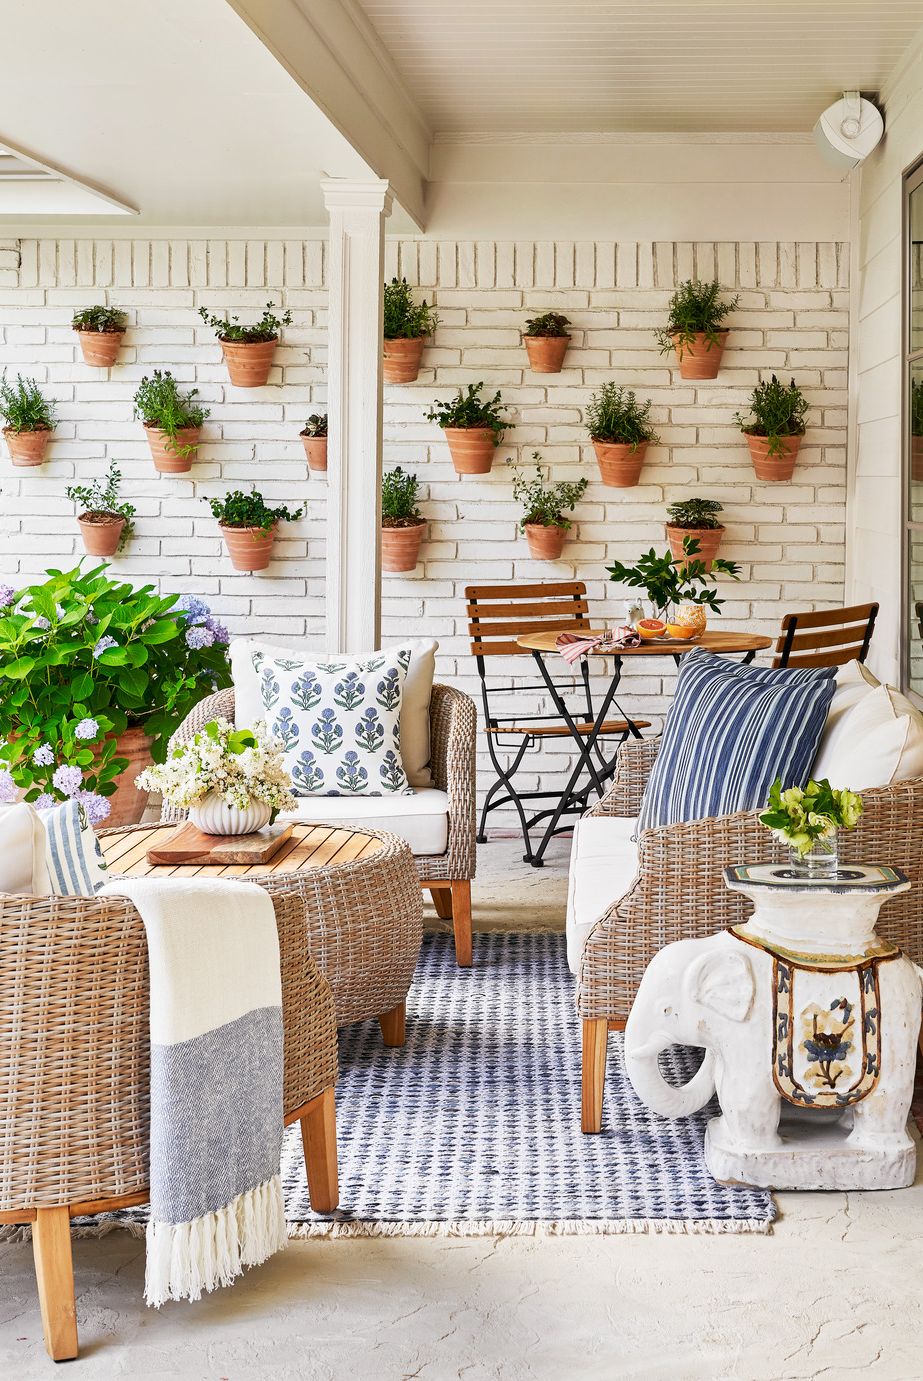 Wall potted plants, woven patio furniture, rattan, wicker mounted on white brick wall